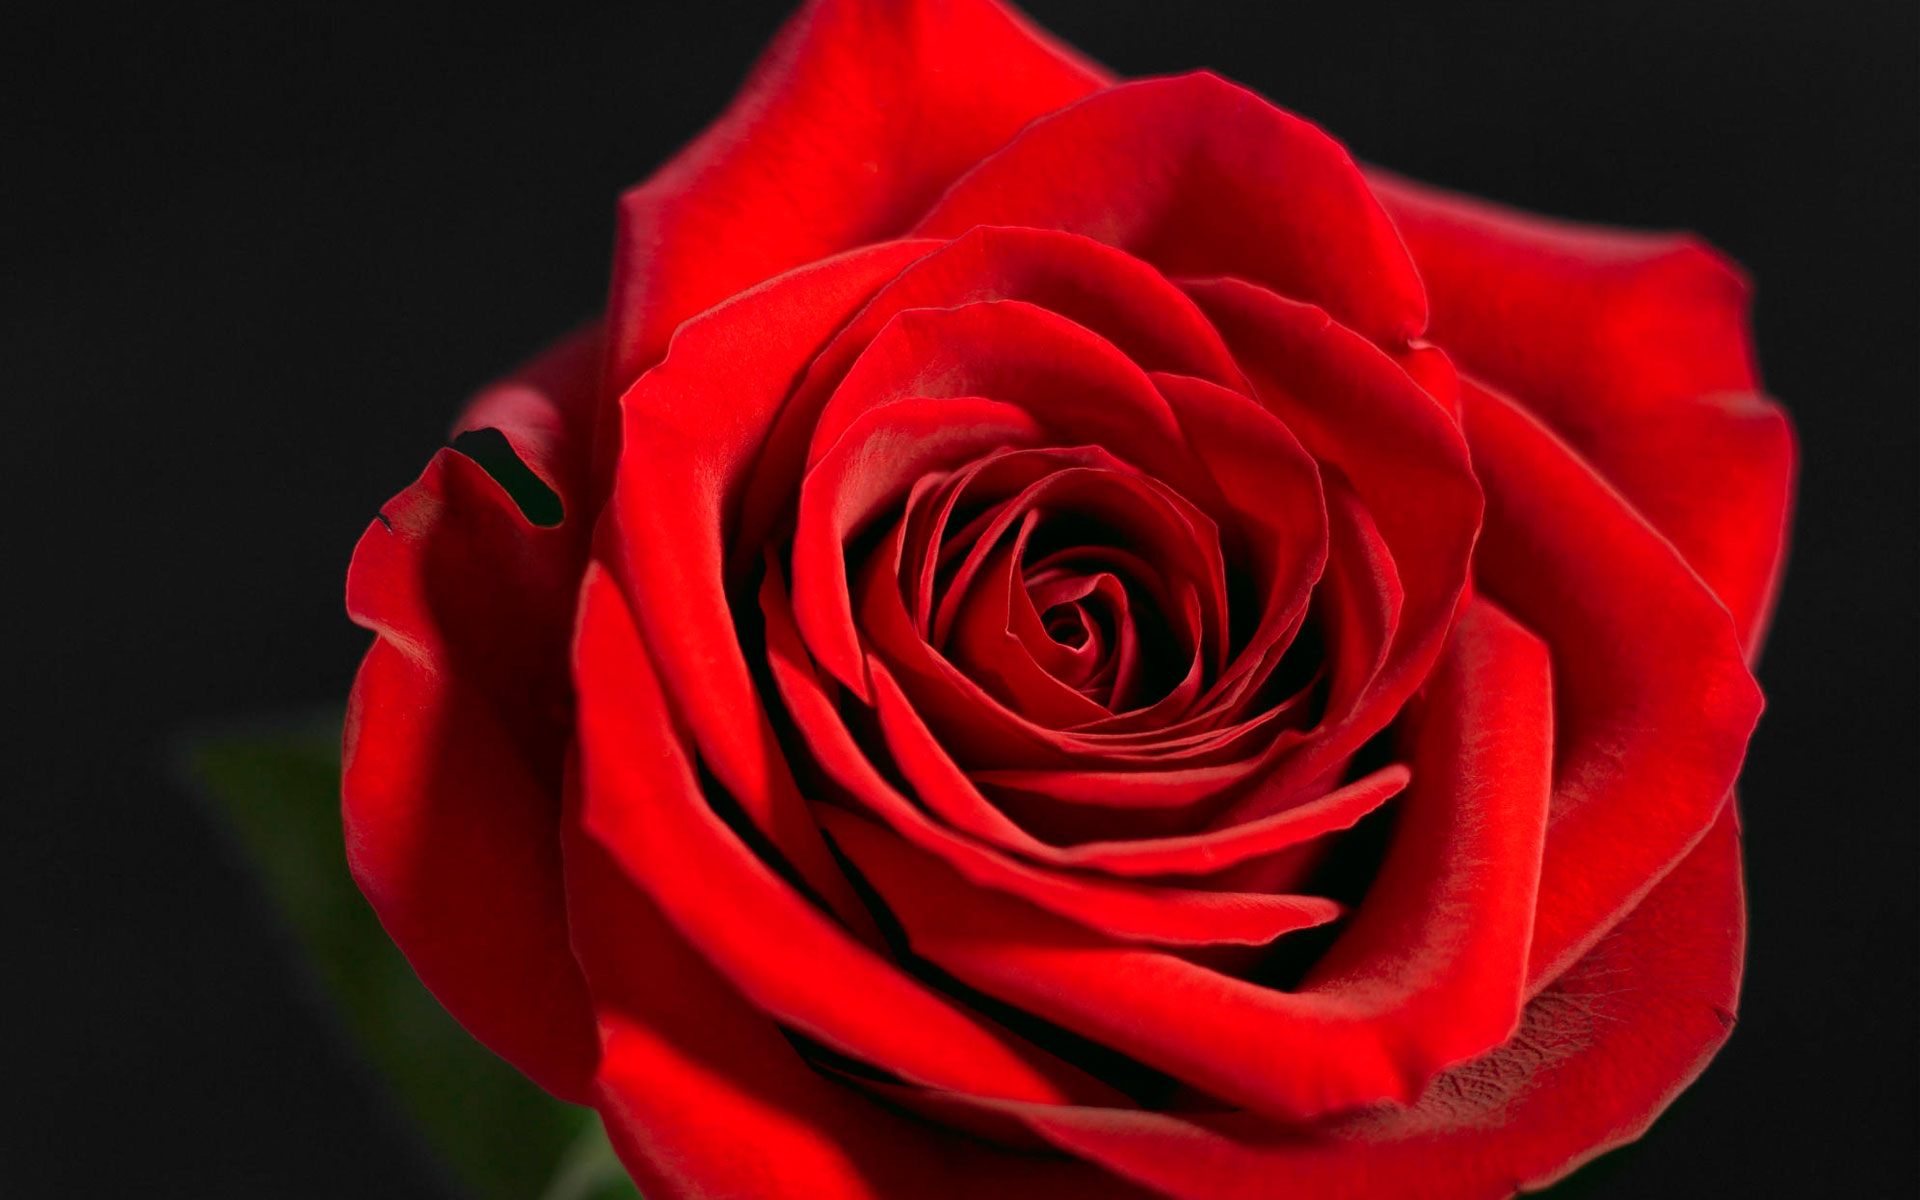 Free Download Red Rose Wallpapers Hd Wallpapers 1920x1200 For Your Desktop Mobile And Tablet